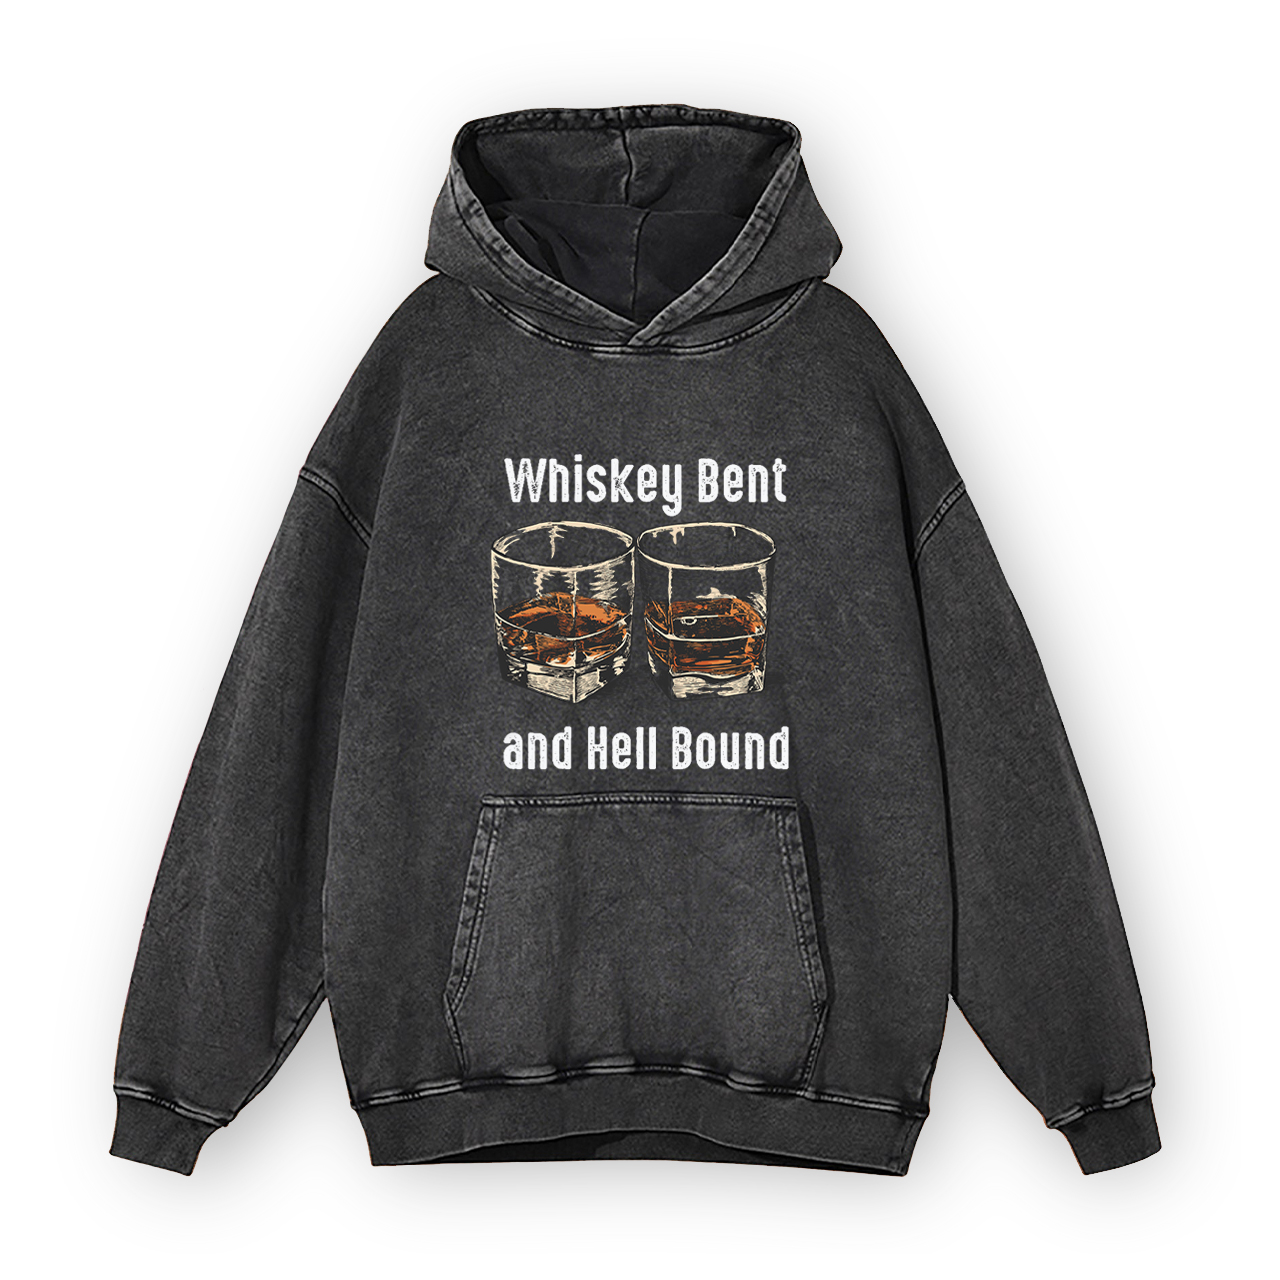 Whiskey Bent and Hell Bound Garment-Dye Hoodies